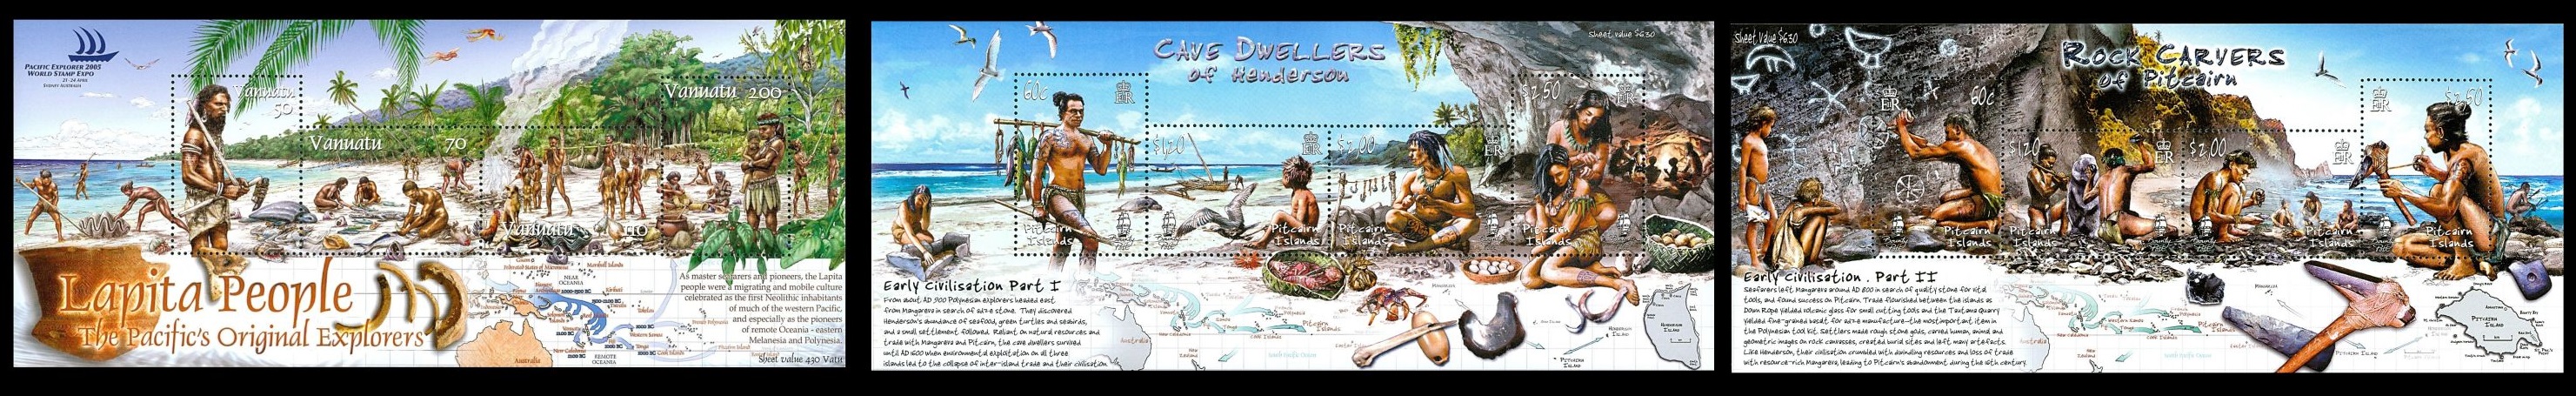 explorers of pacific on stamps of Vanuatu and Pitcairn islands